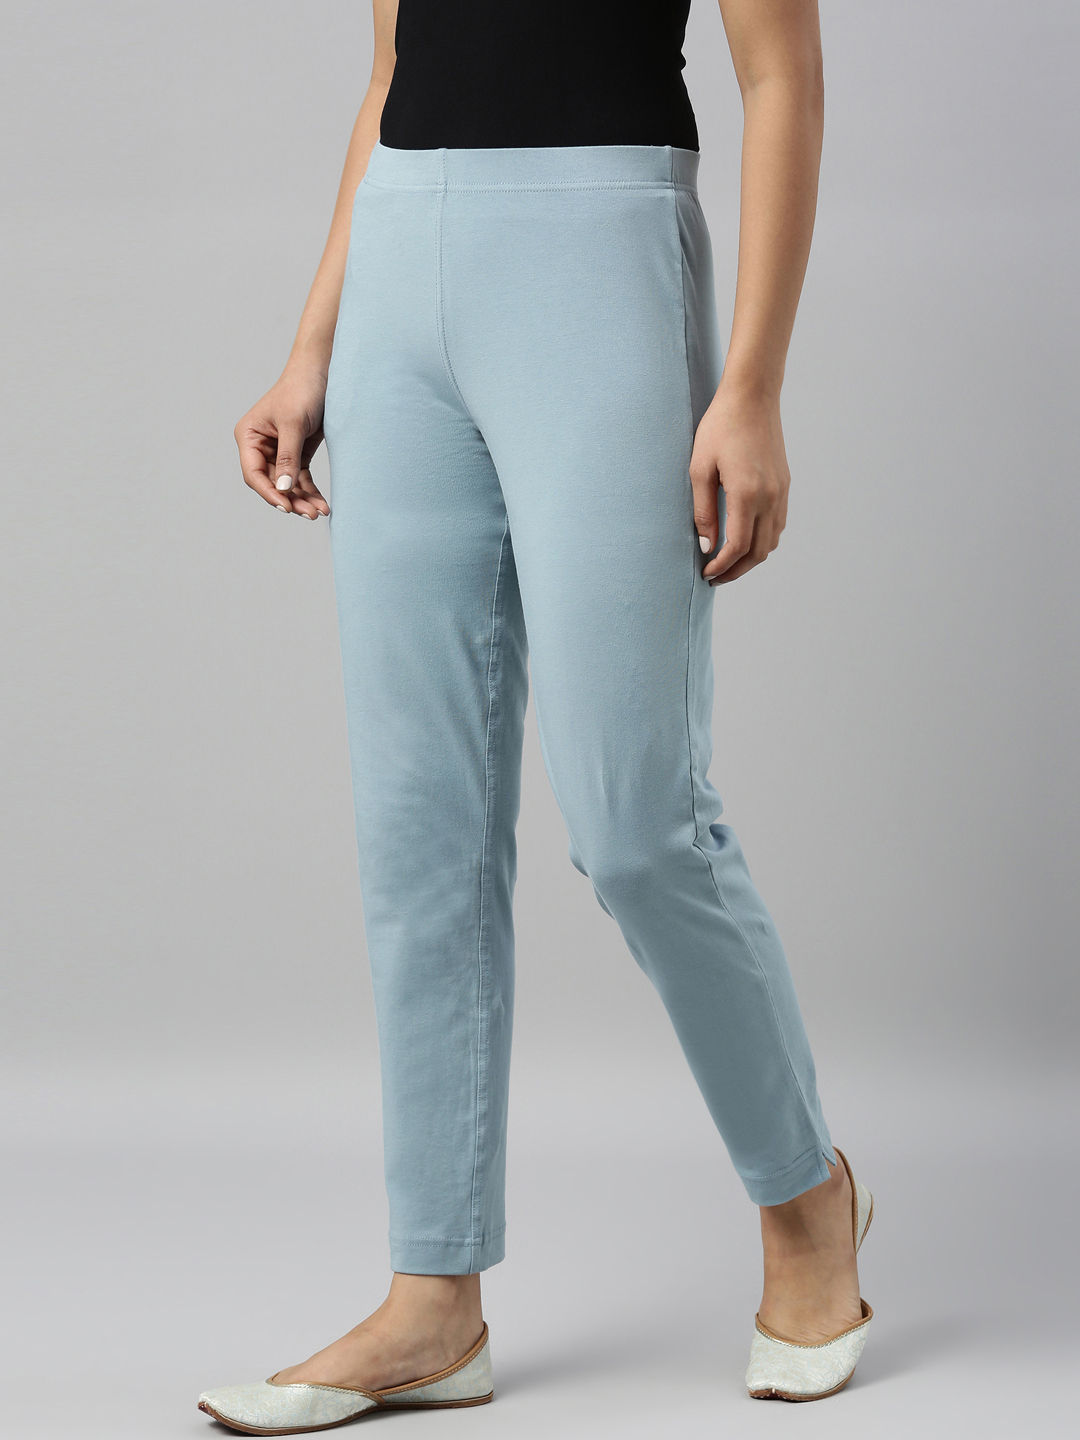 Buy Blue Trousers & Pants for Women by ORCHID BLUES Online | Ajio.com